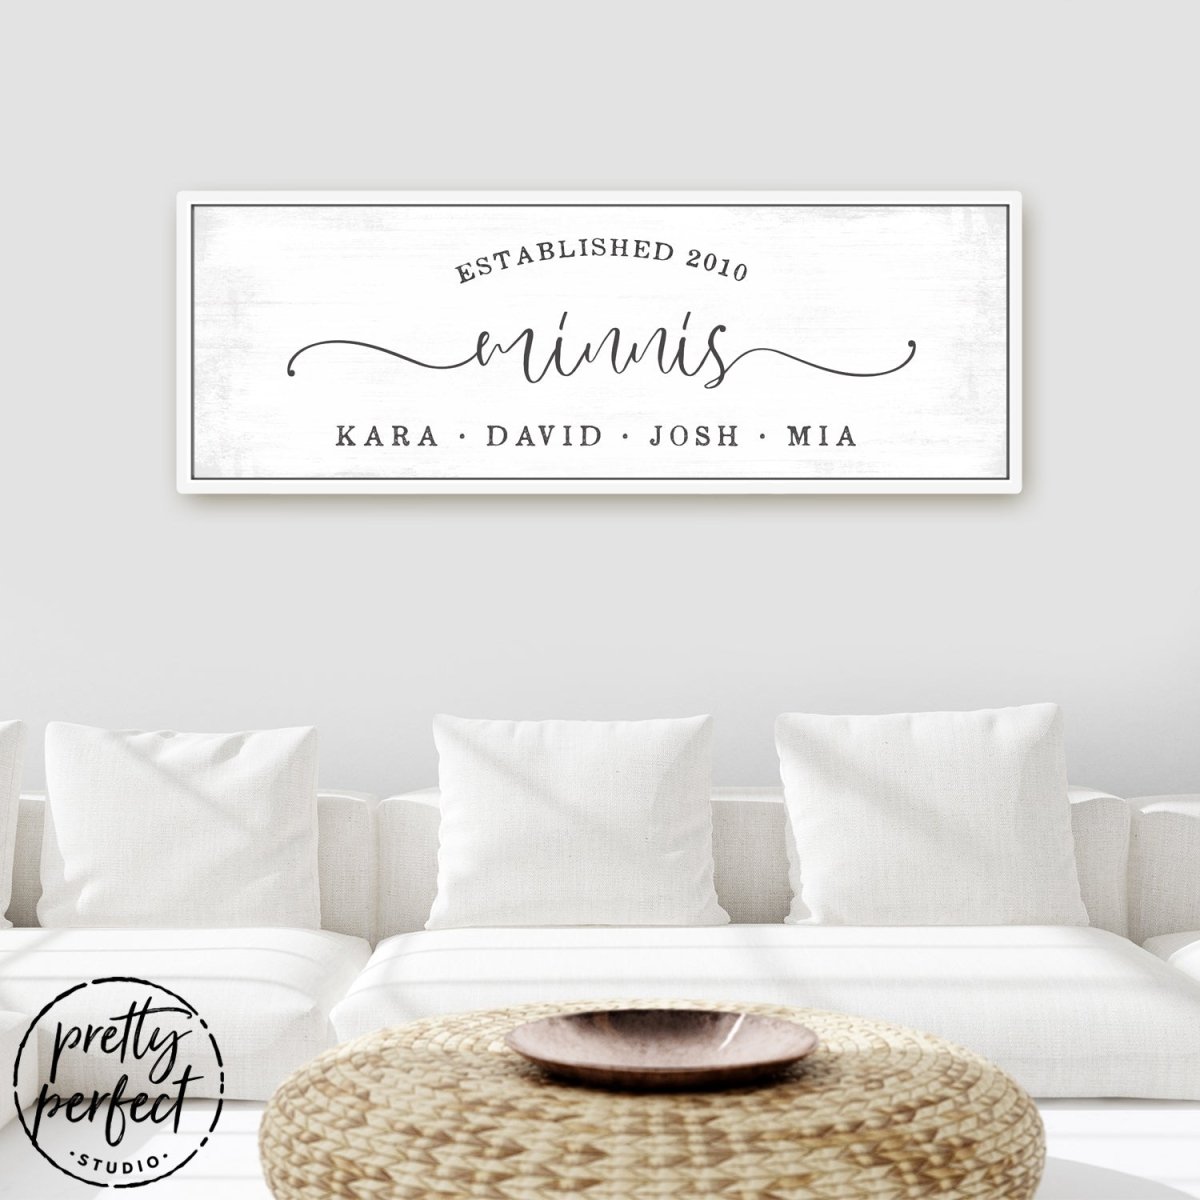 Personalized Family Names Wall Art With Established Date Above Couch - Pretty Perfect Studio